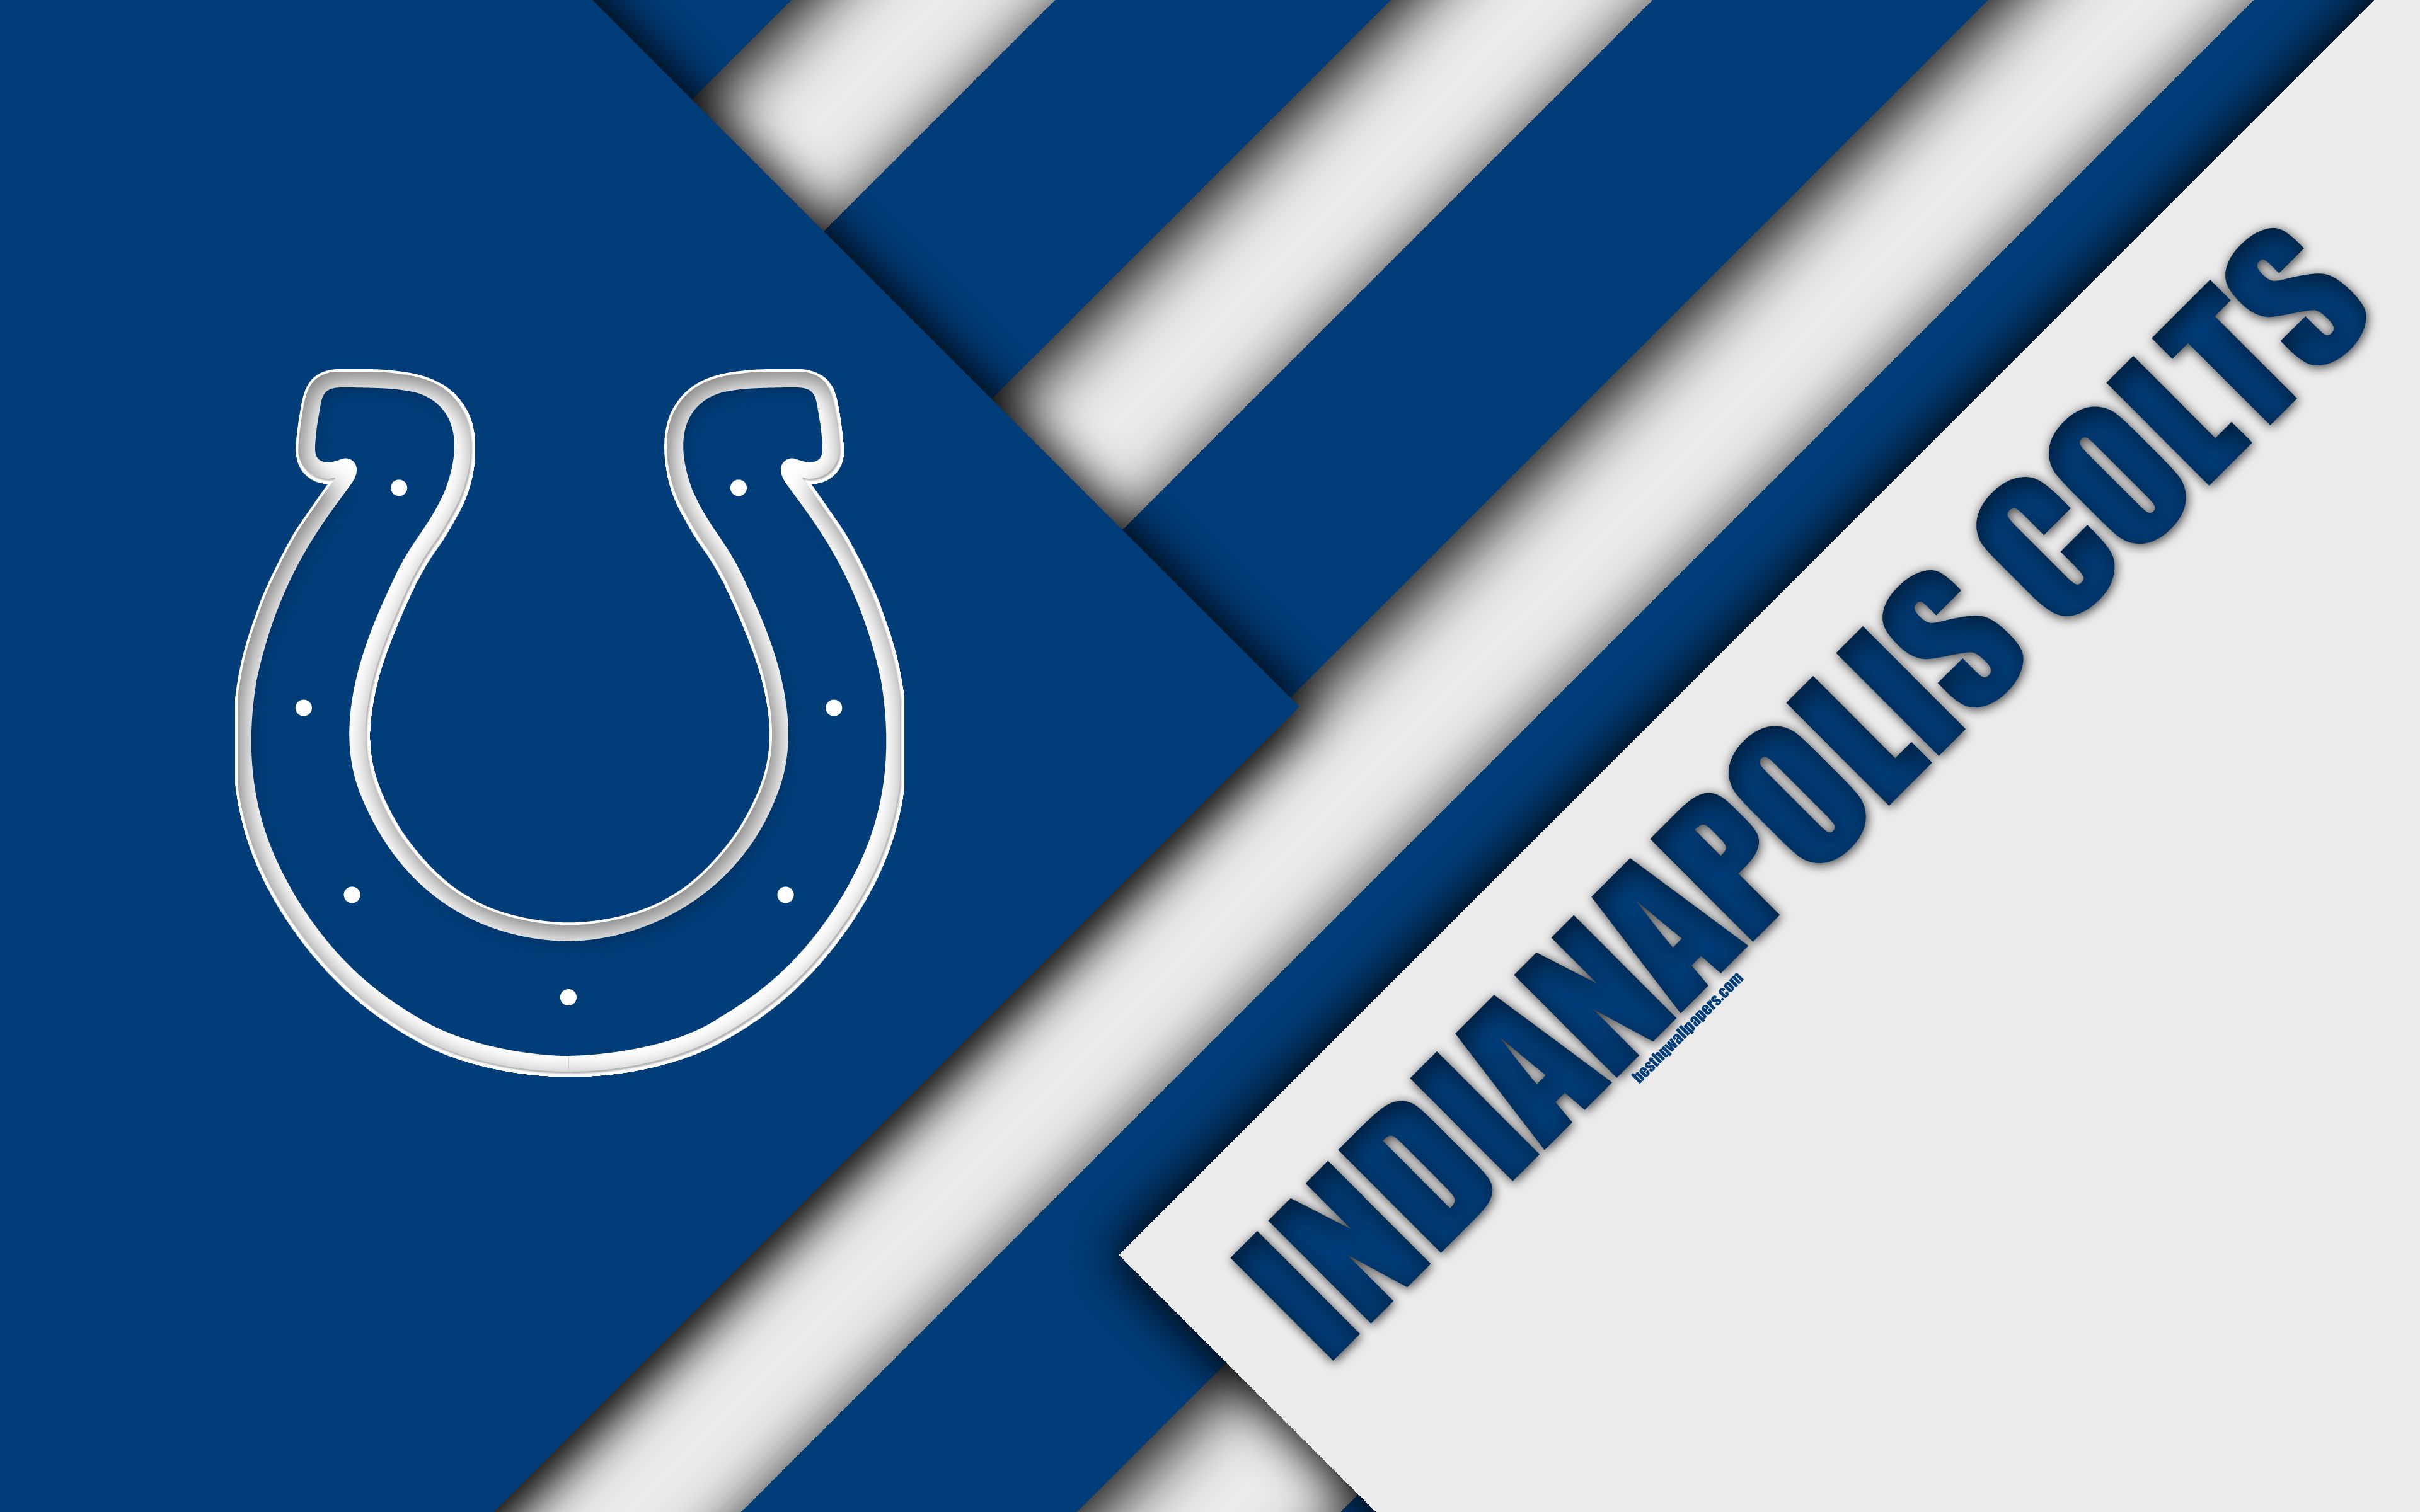 Download wallpaper Indianapolis Colts, 4k, logo, NFL, blue white